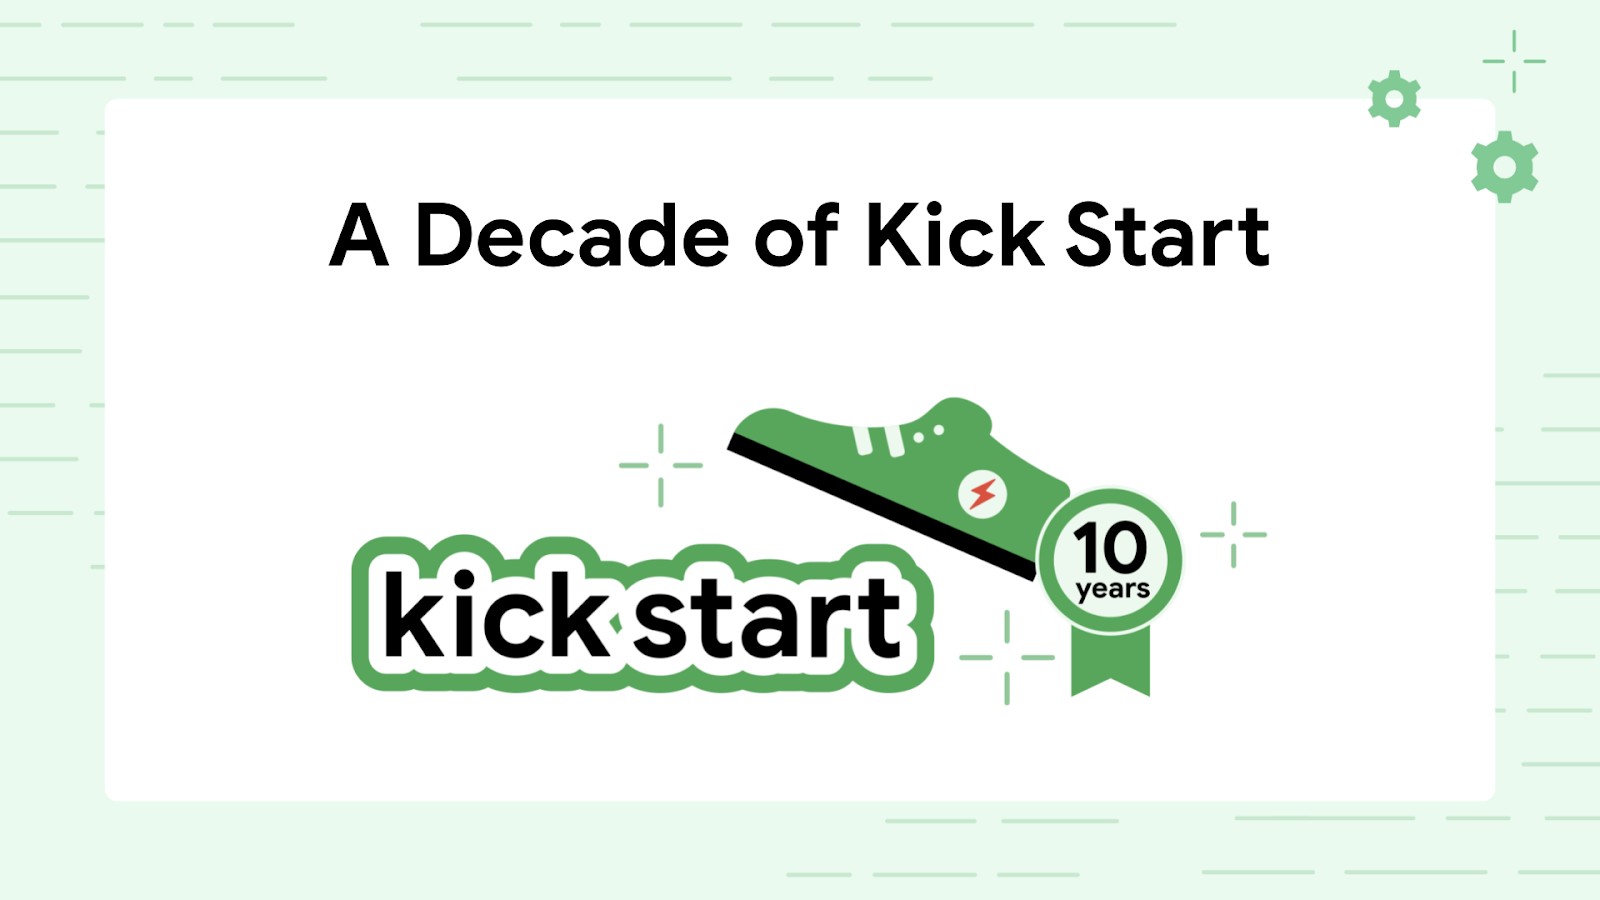 A Decade of Kick Start - Google for Developers